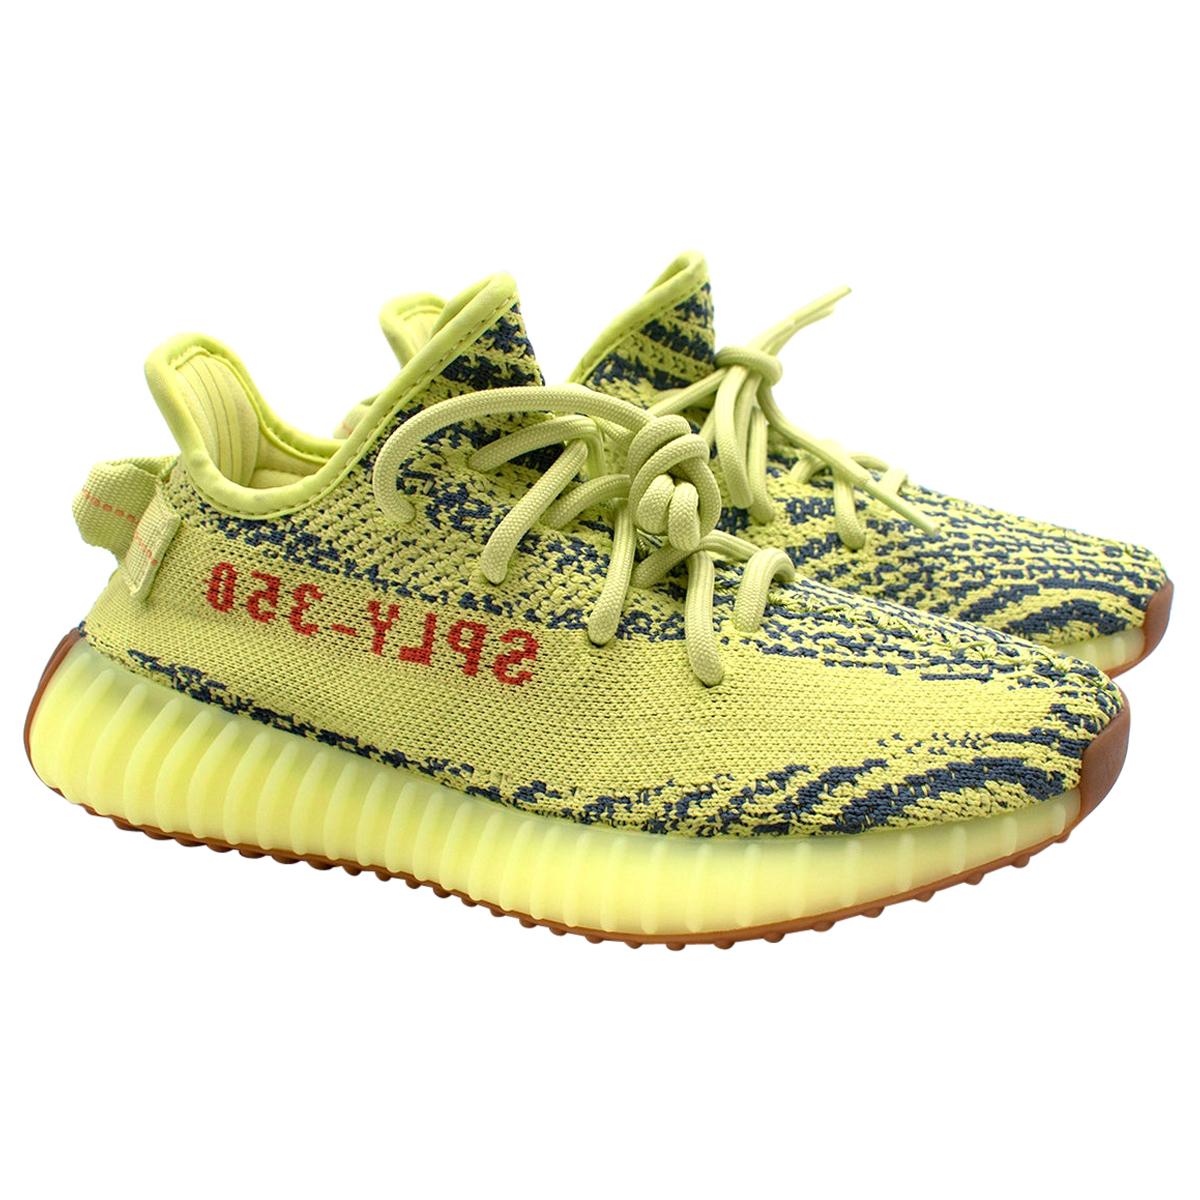 Yeezy Neon Yellow Boost 350 V2 Trainers - Us 6.5 For Sale at 1stDibs | neon  yeezys, neon yezzy, neon yellow yeezys